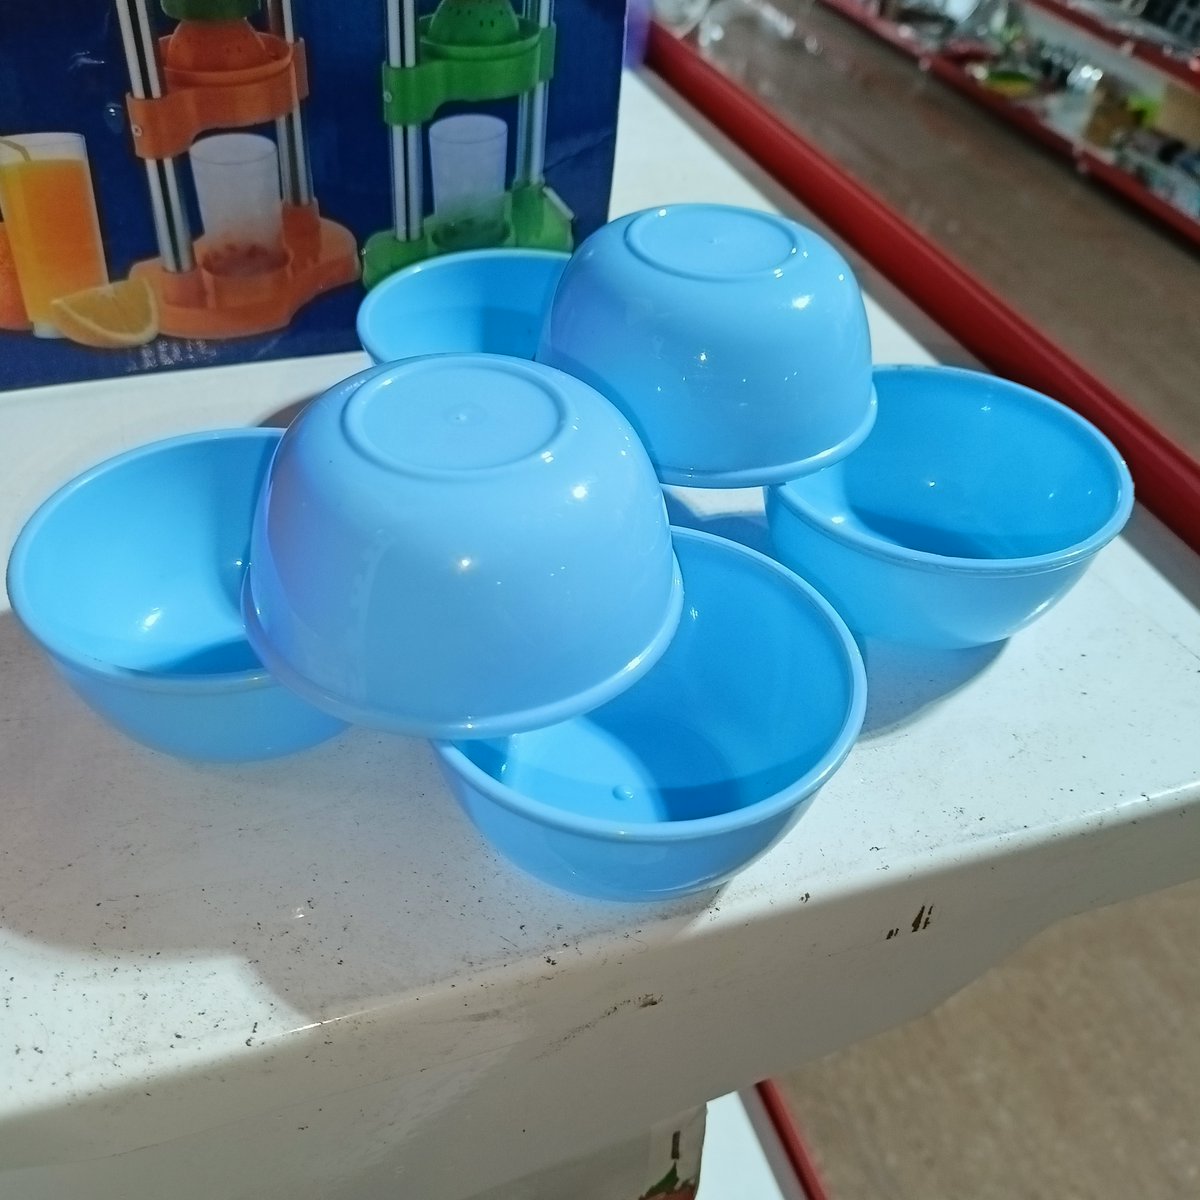 2425 SMALL PLASTIC BOWL SET, MICROWAVE SAFE UNBREAKABLE, SET OF 6

SKU 2425_6pc_round_mini_bowl

Rs. 41.00

call on this number : 9624666631

visit our website :
deodap.com/collections/al…

#dropshipping
#DeoDap
#smallbowl
#plasticbowl
#microwavesafe
#unbreakable
#kitchenessentials